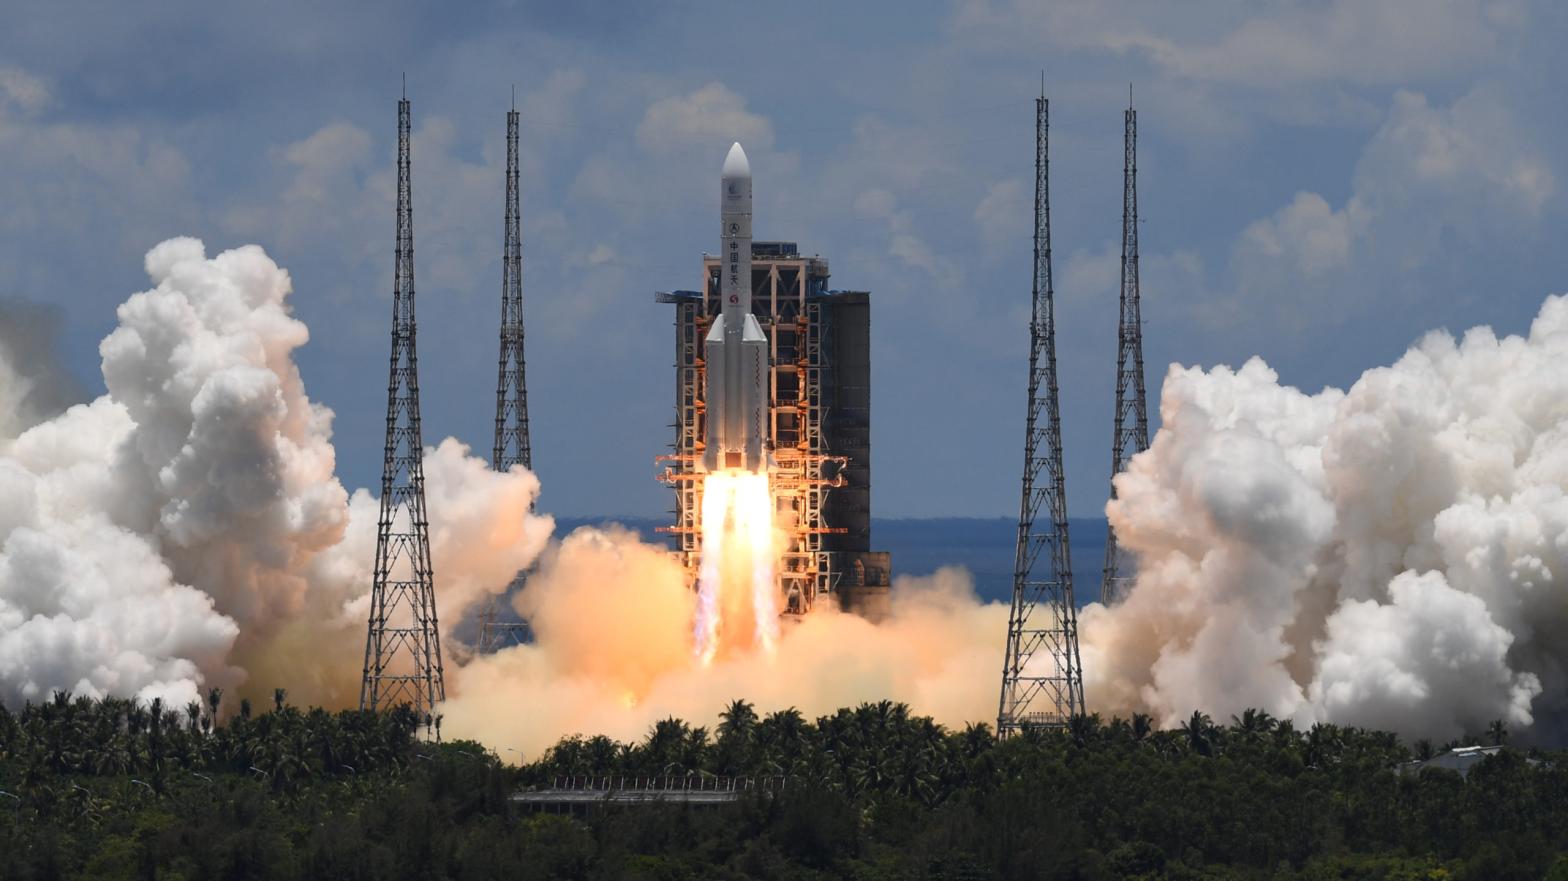 A Long March-5 rocket launches from Wenchang Space Launch Centre in southern China's Hainan Province on July 23, 2020. (Photo: Noah Celis, Getty Images)